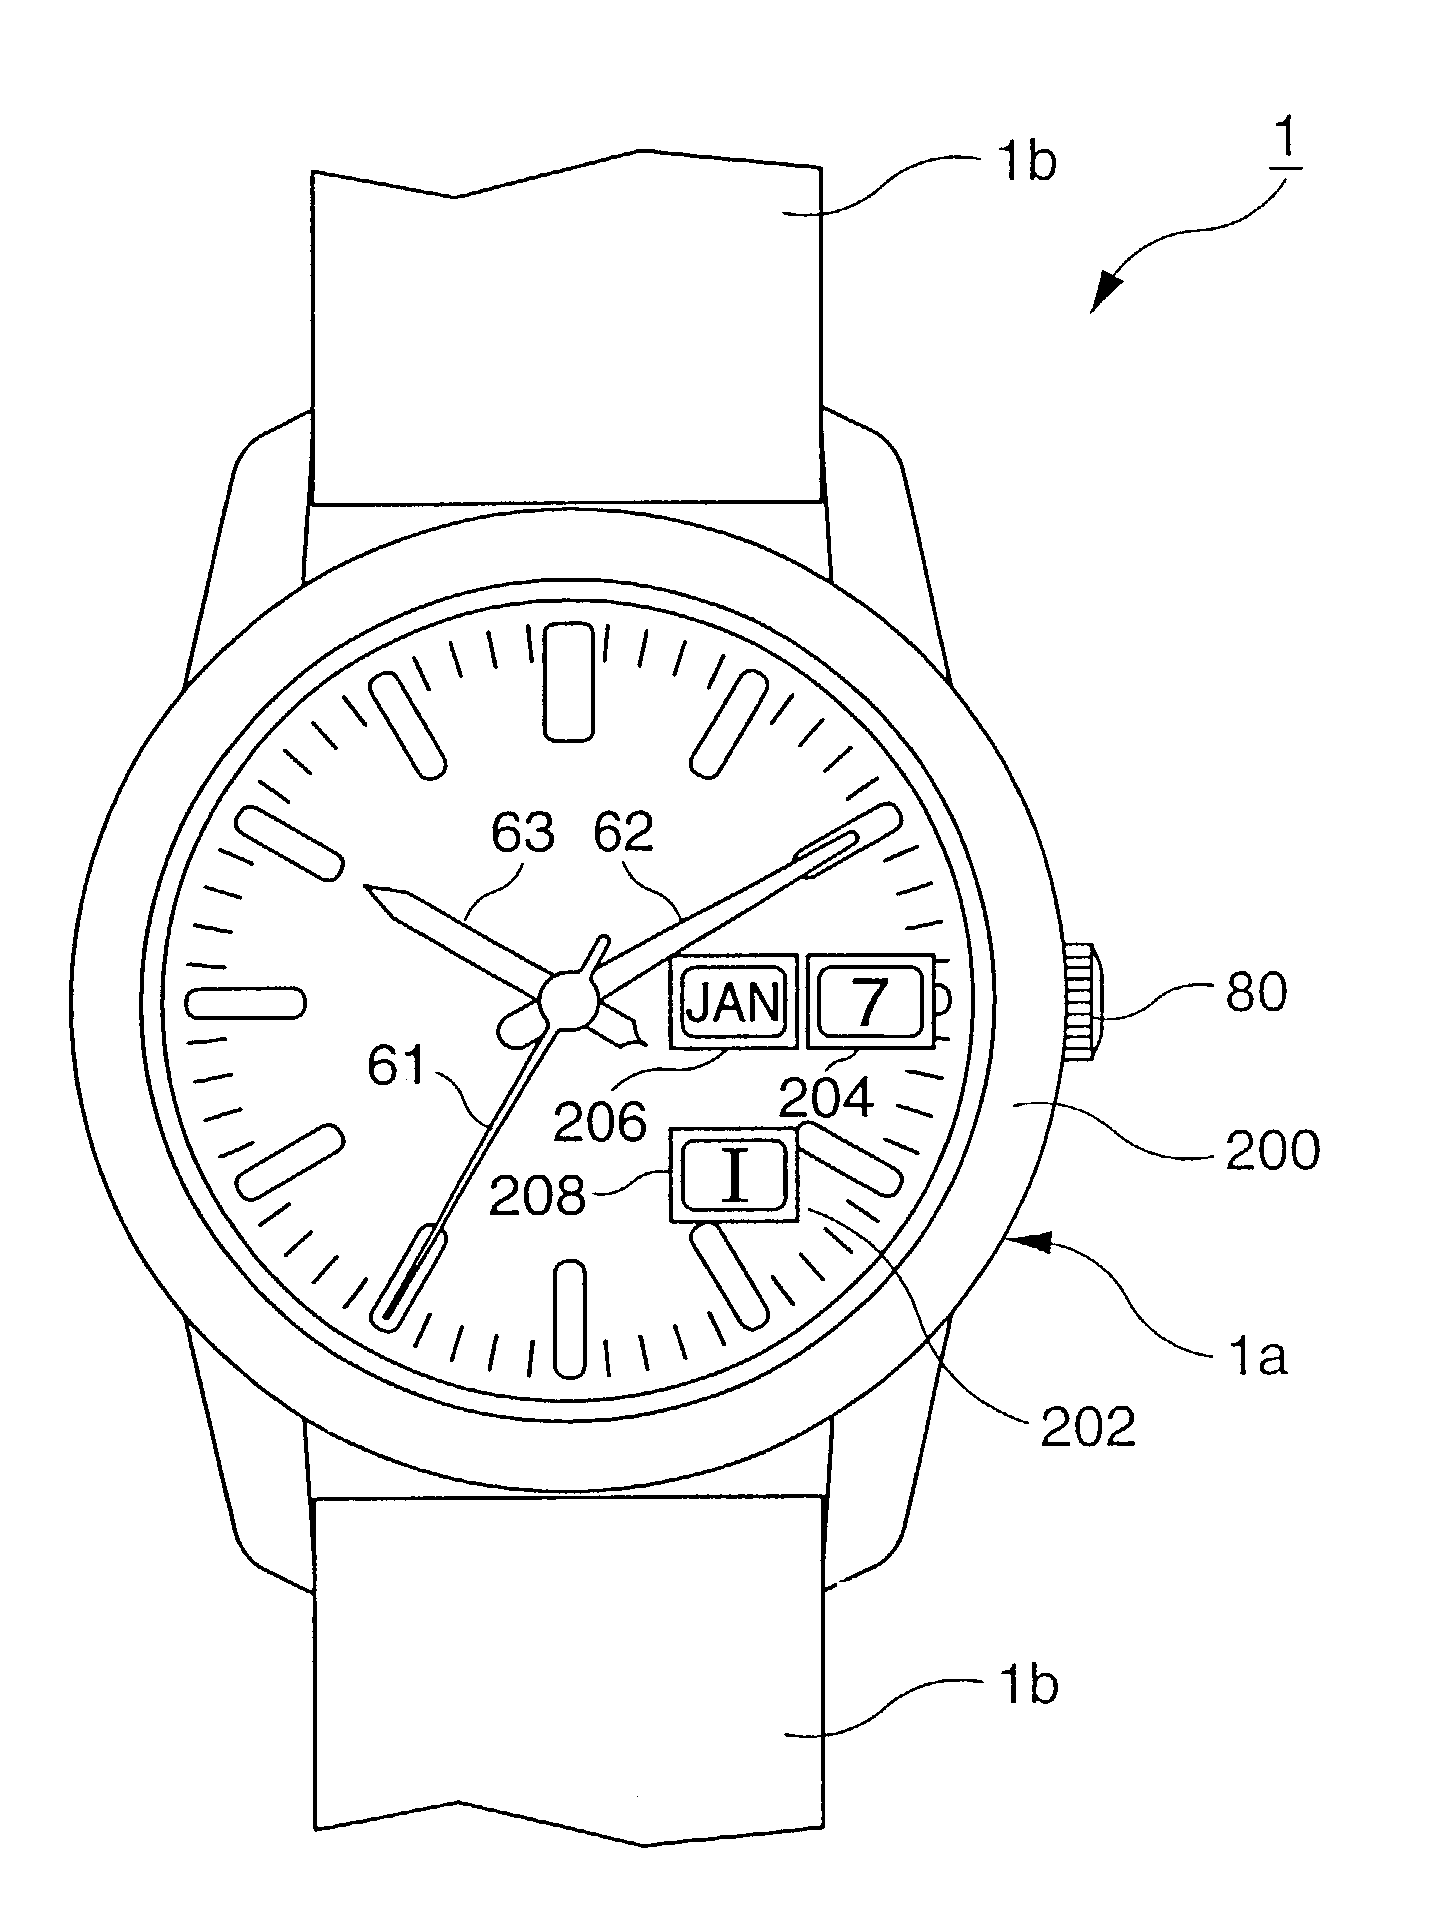 Electronic timepiece with a date display function